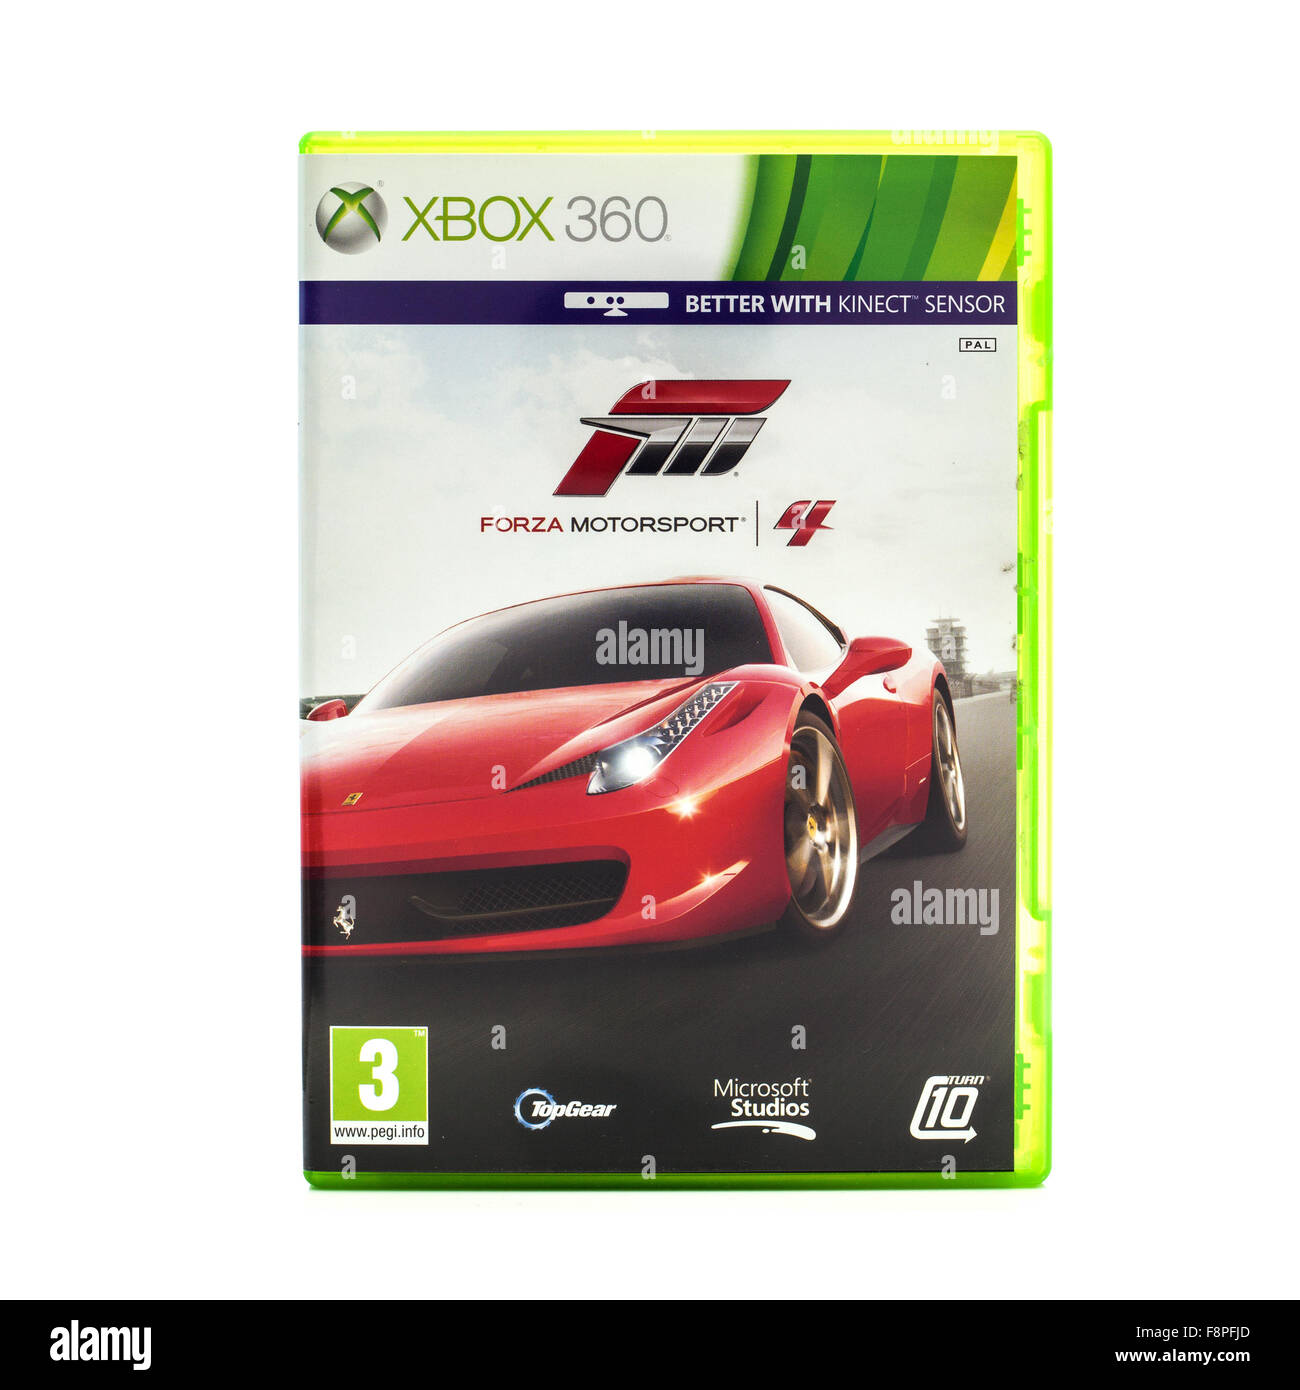 Forza Motorsport 4 Game for the Xbox 360 on a White Background Stock Photo  - Alamy